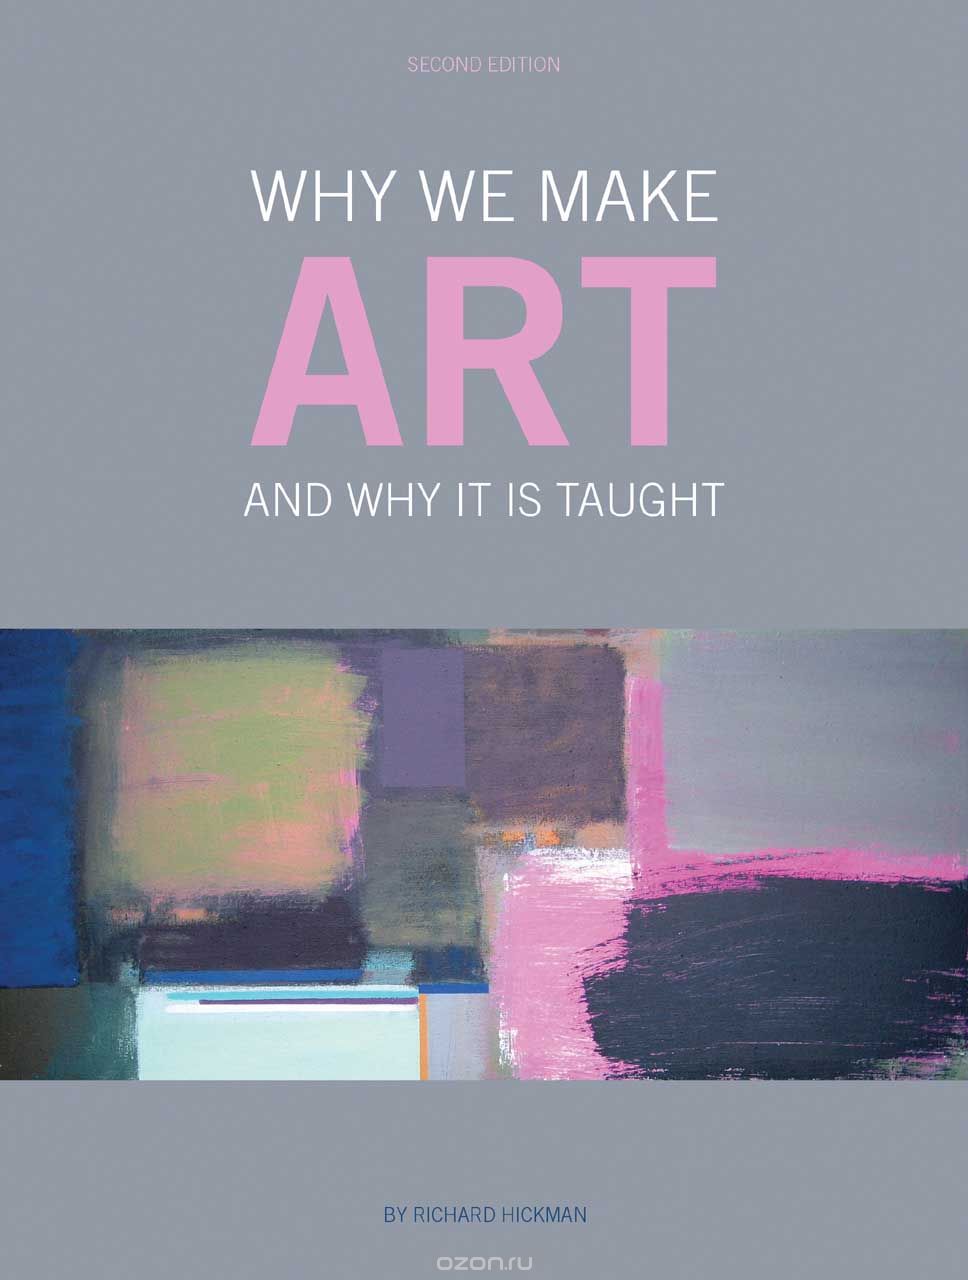 Скачать книгу "Why We Make Art – And Why it is Taught"